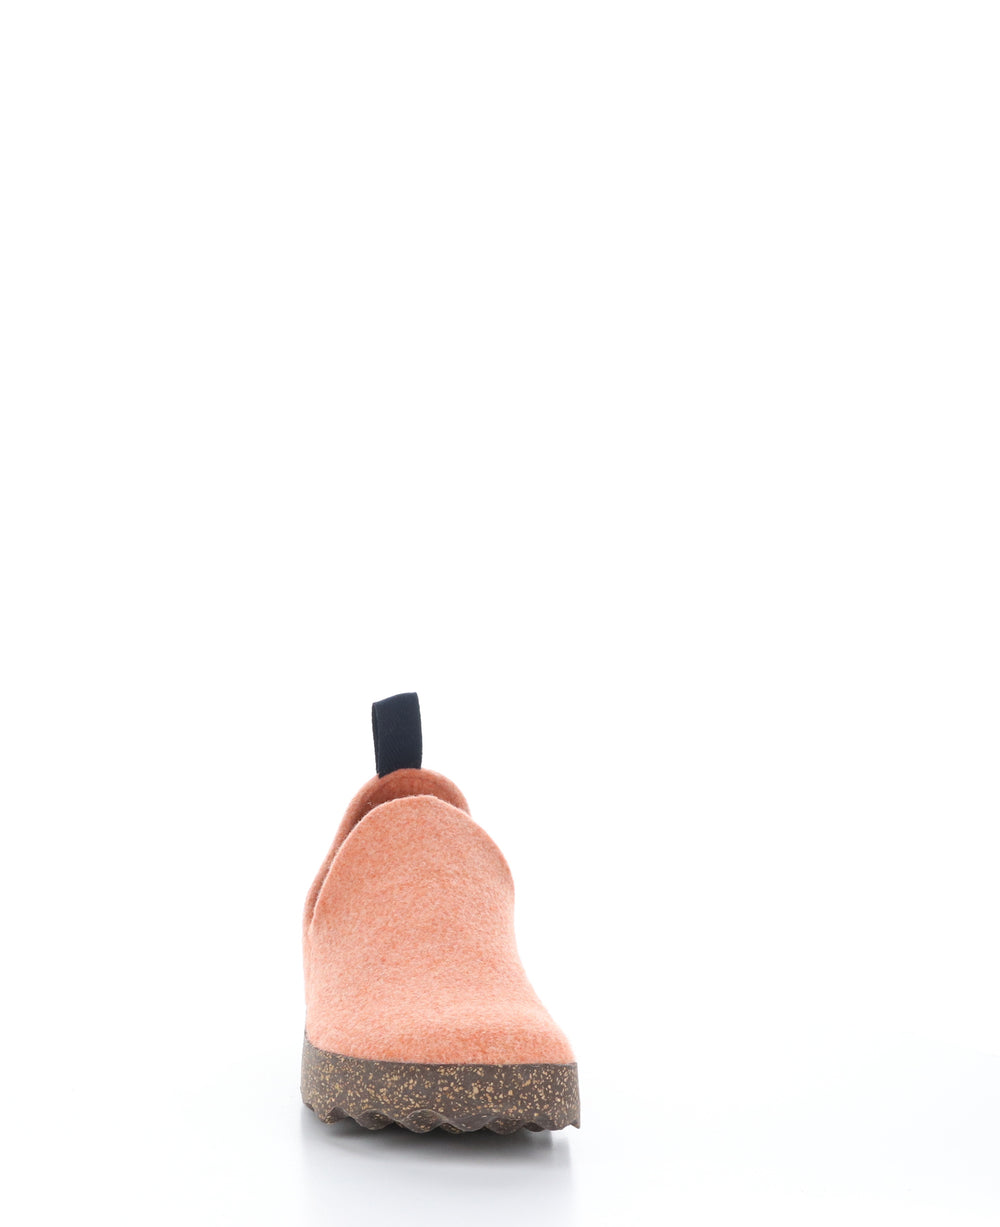 CITY Tangerine Round Toe Shoes|CITY Chaussures à Bout Rond in Orange